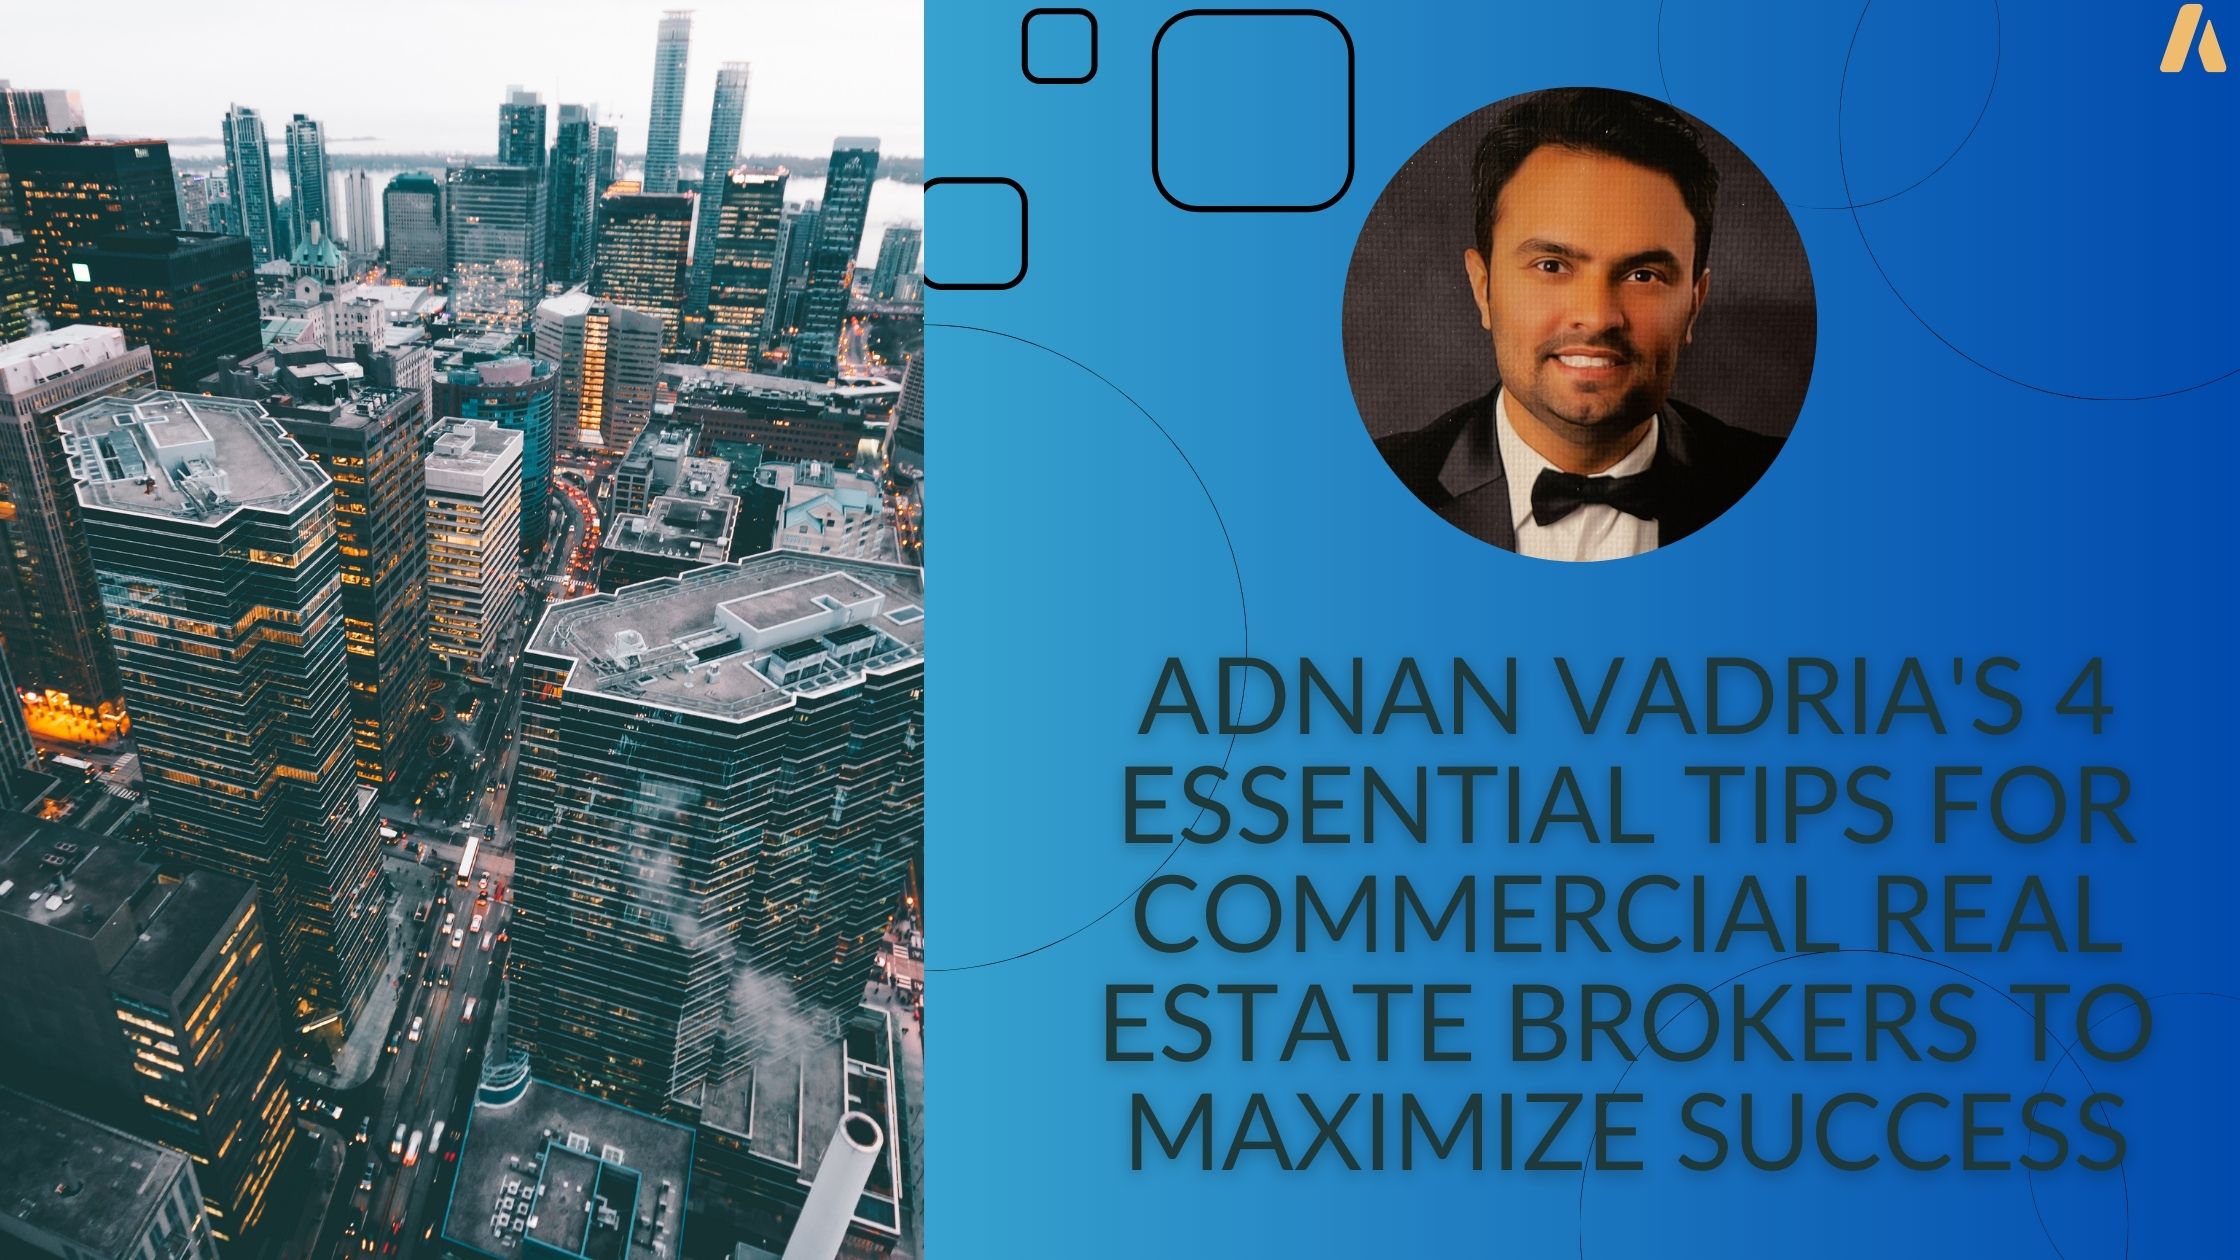 Adnan Vadria's 4 Essential Tips for Commercial Real Estate Brokers to Maximize Success